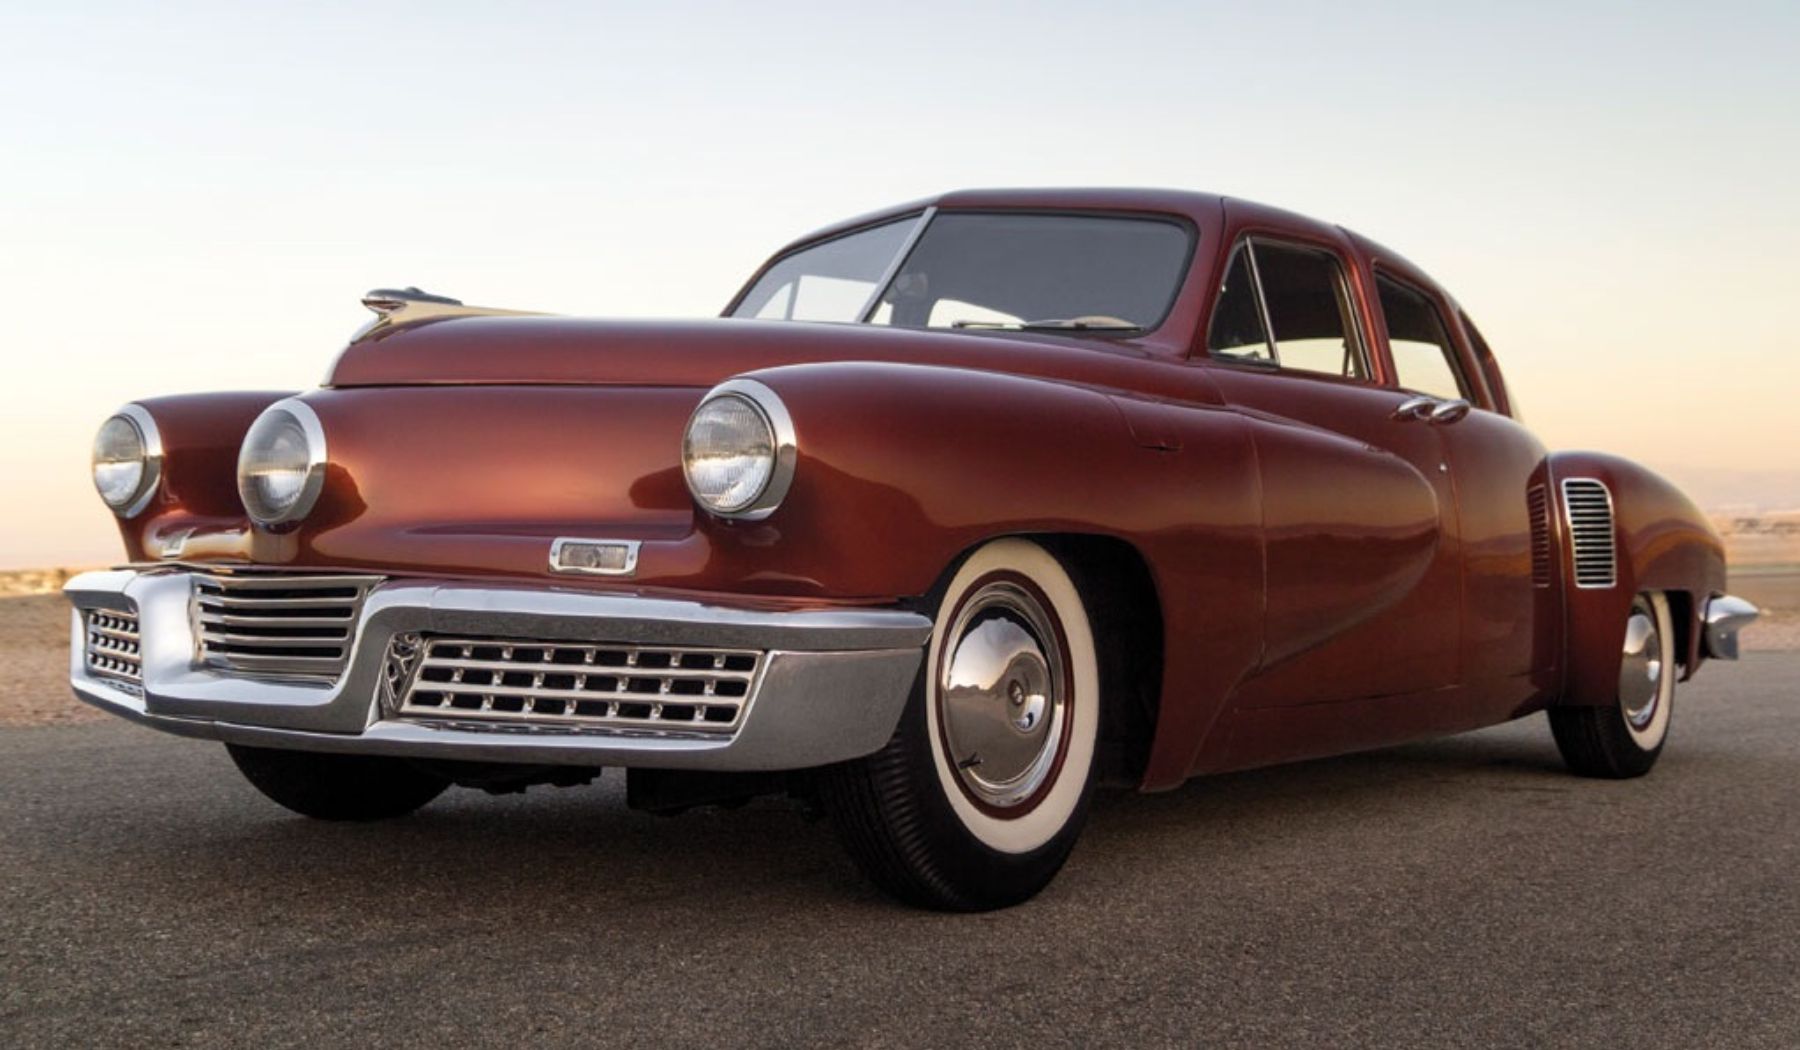 Remembering the Tucker 48, One of the Most Innovative Sedans Ever